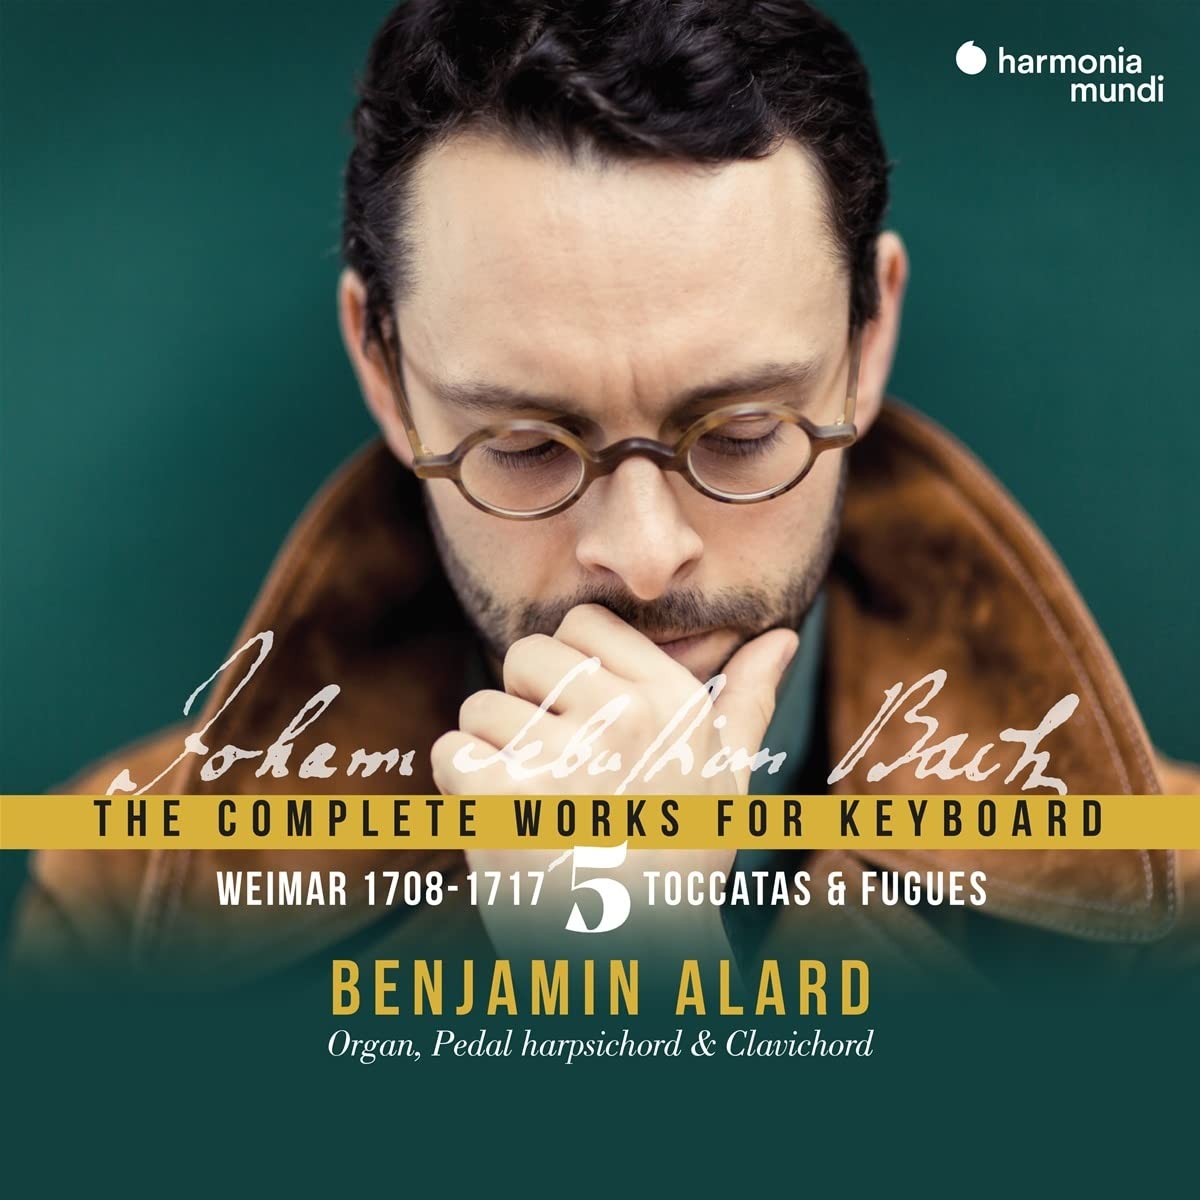 BACH: COMPLETE WORKS FOR KEYBOARD, Vol. 5 "Weimar 1706-1717, Toccatas and Fugues" - BENJAMIN ALARD (3 CDs)